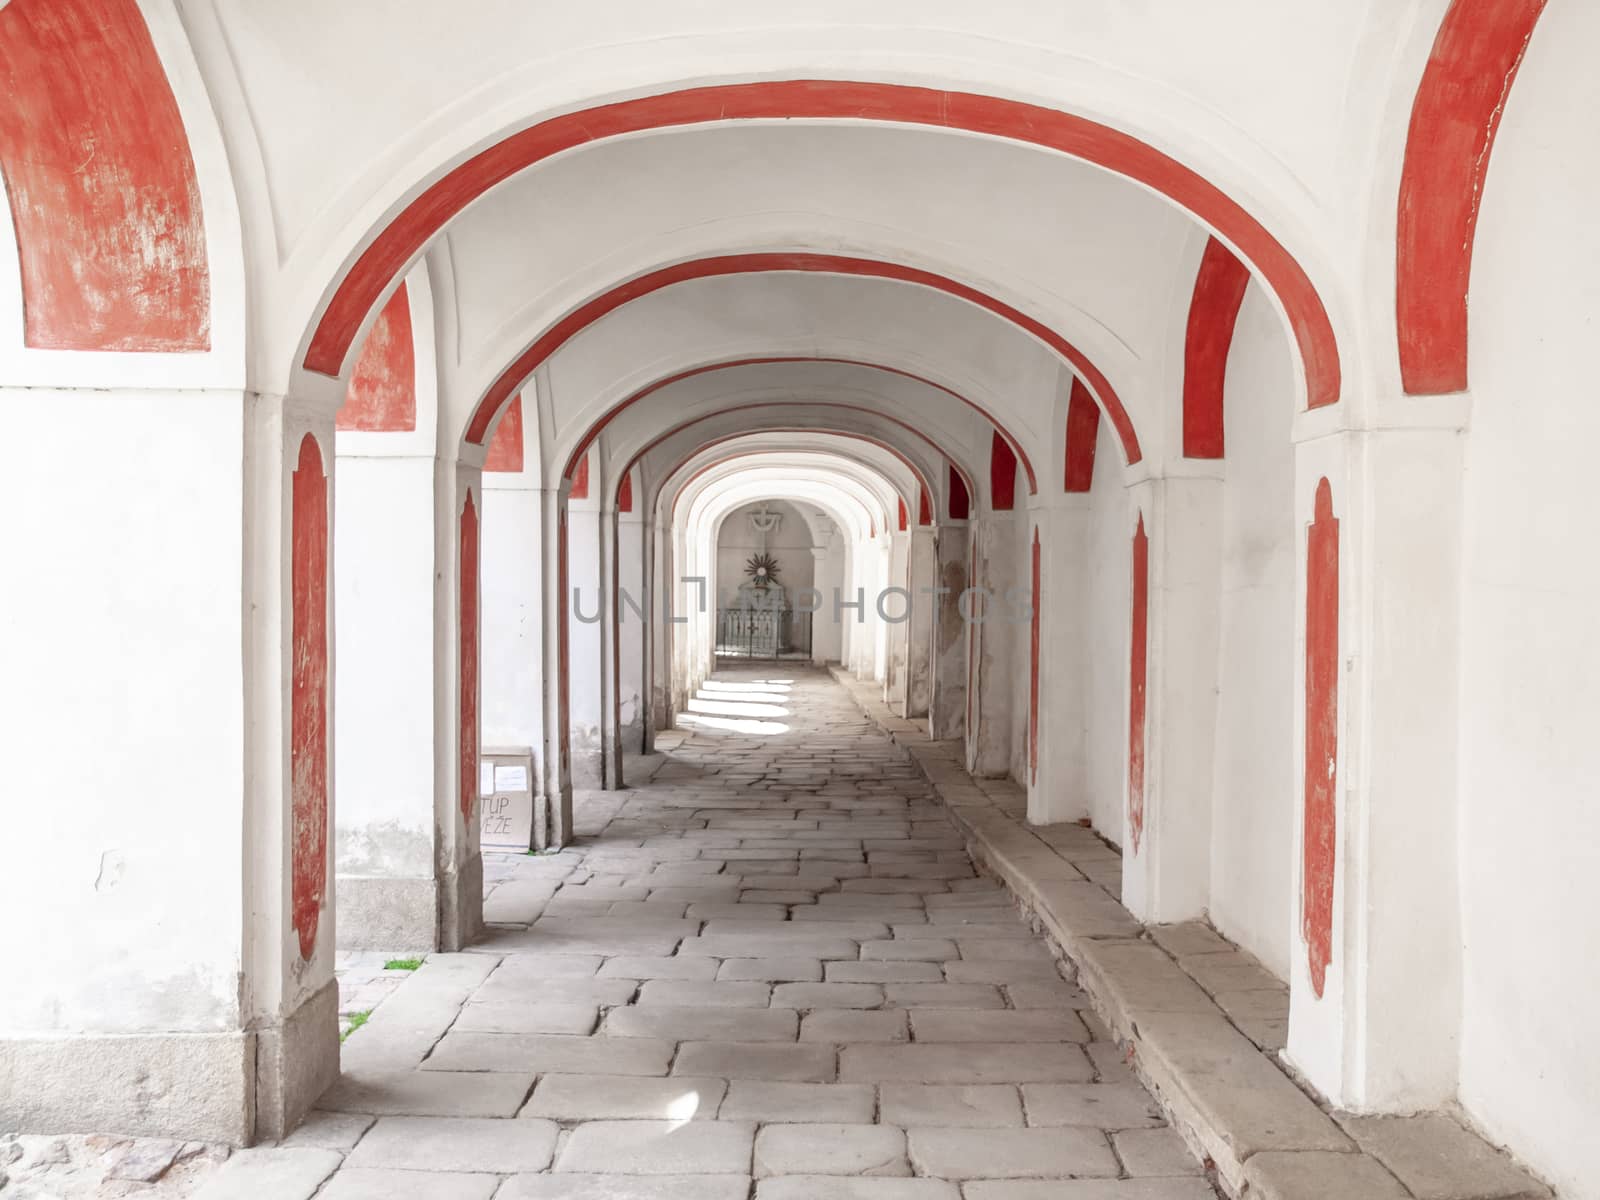 Long arcade corridior with white and red facade and cobbled floor.